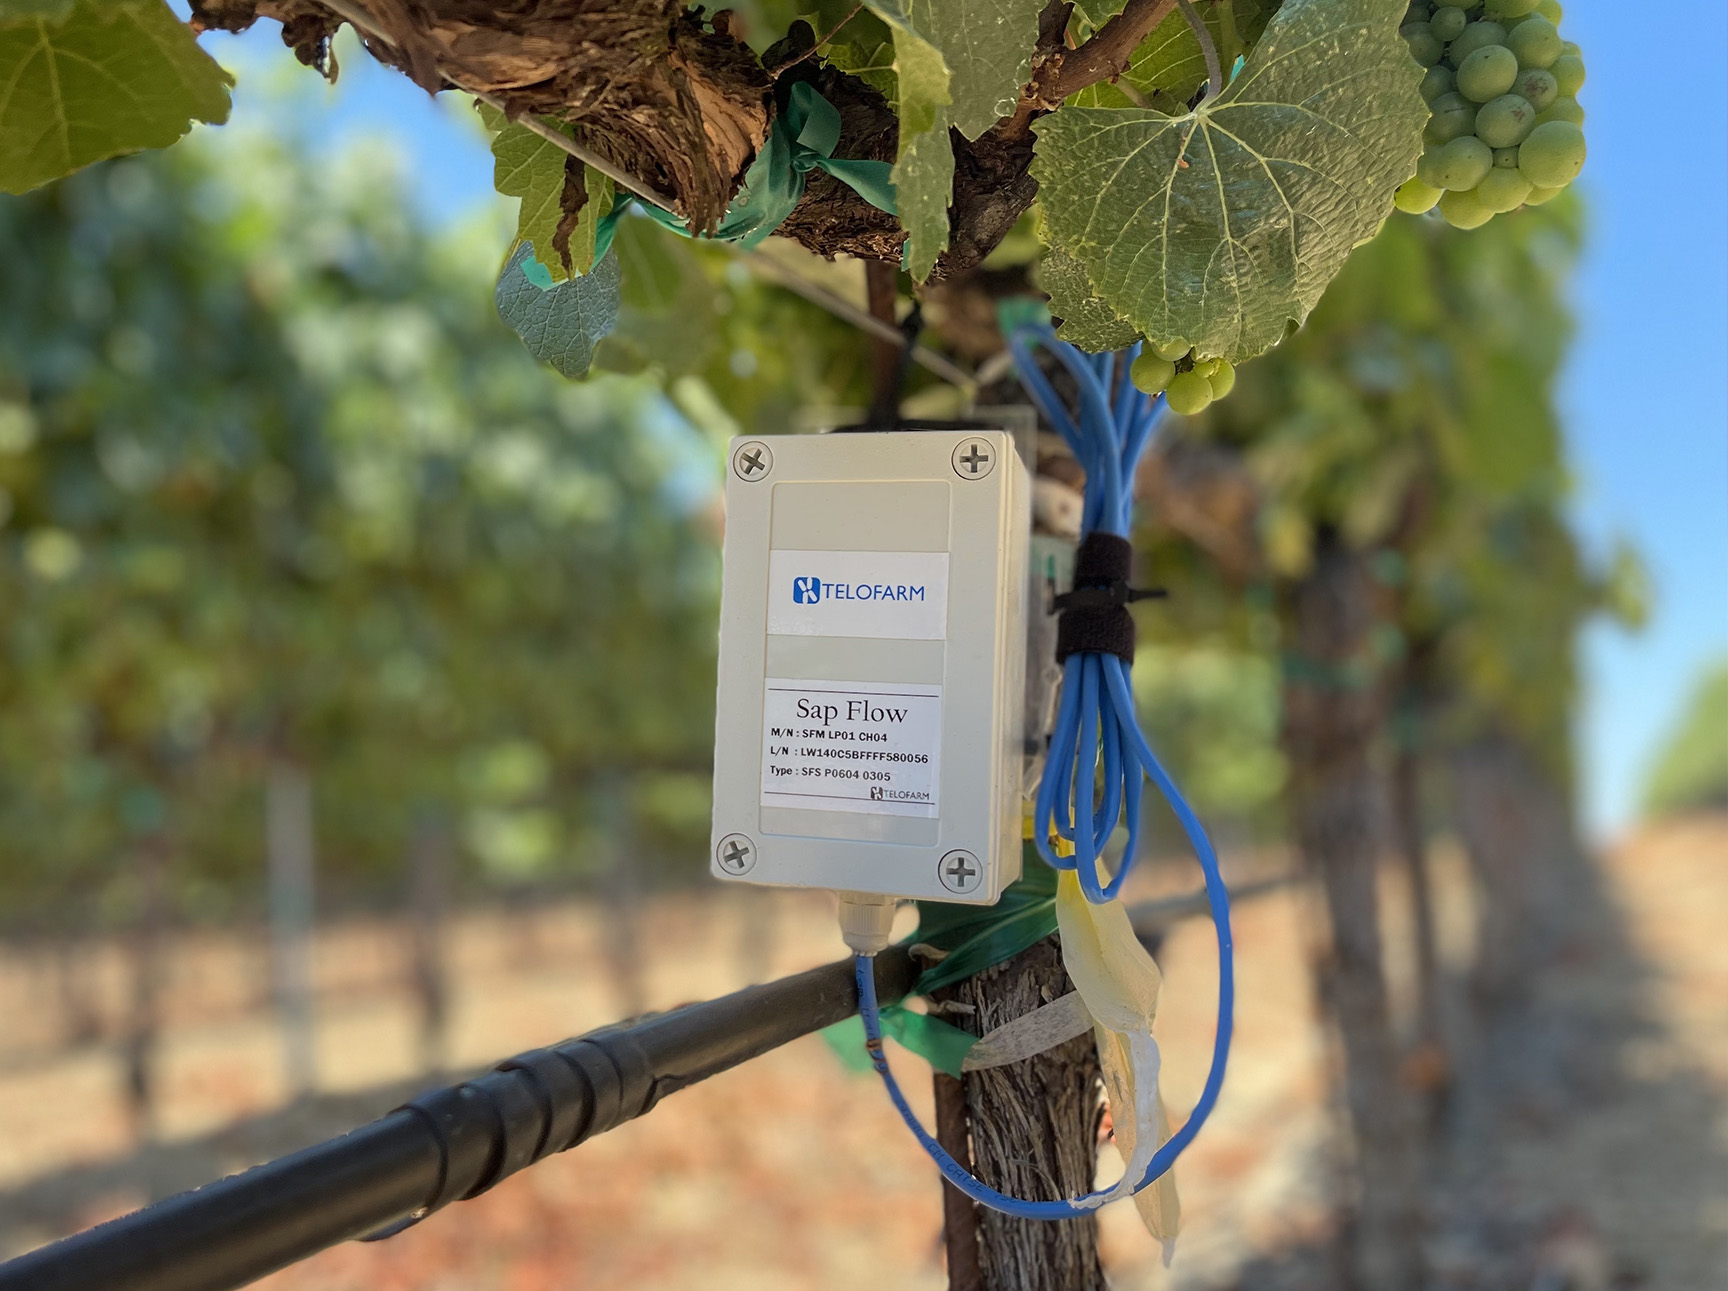 A sap flow module installed on a grapevine